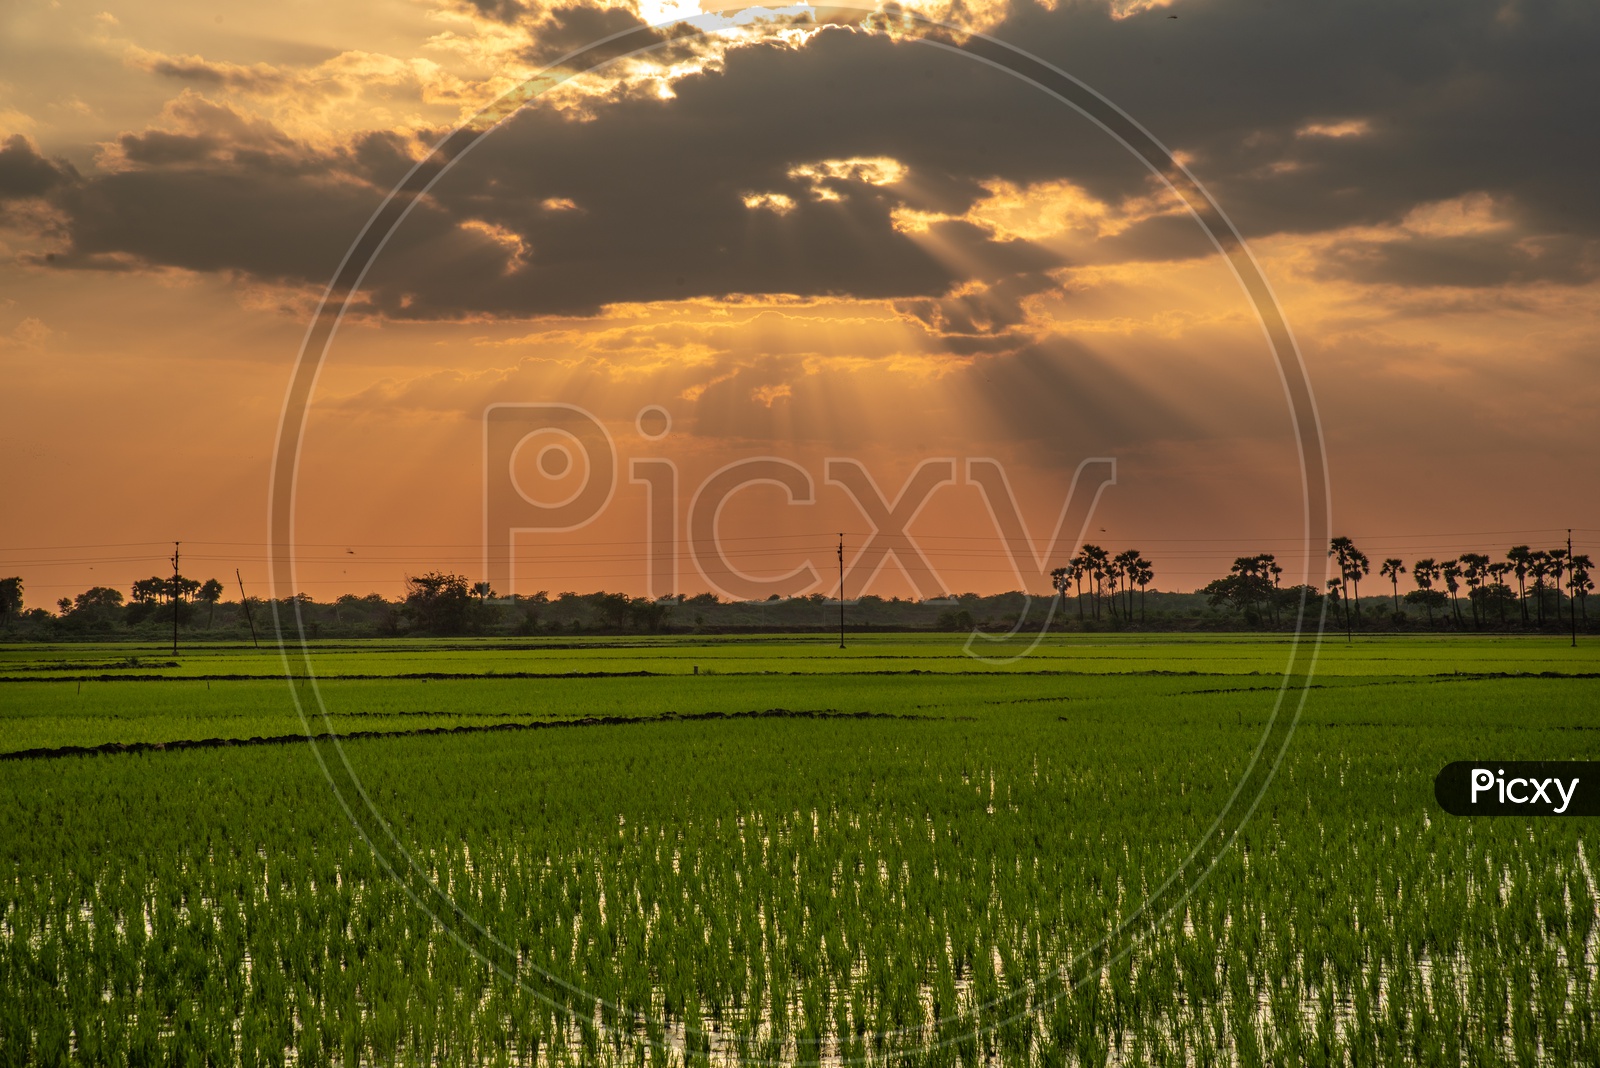 Sunset over a paddy field